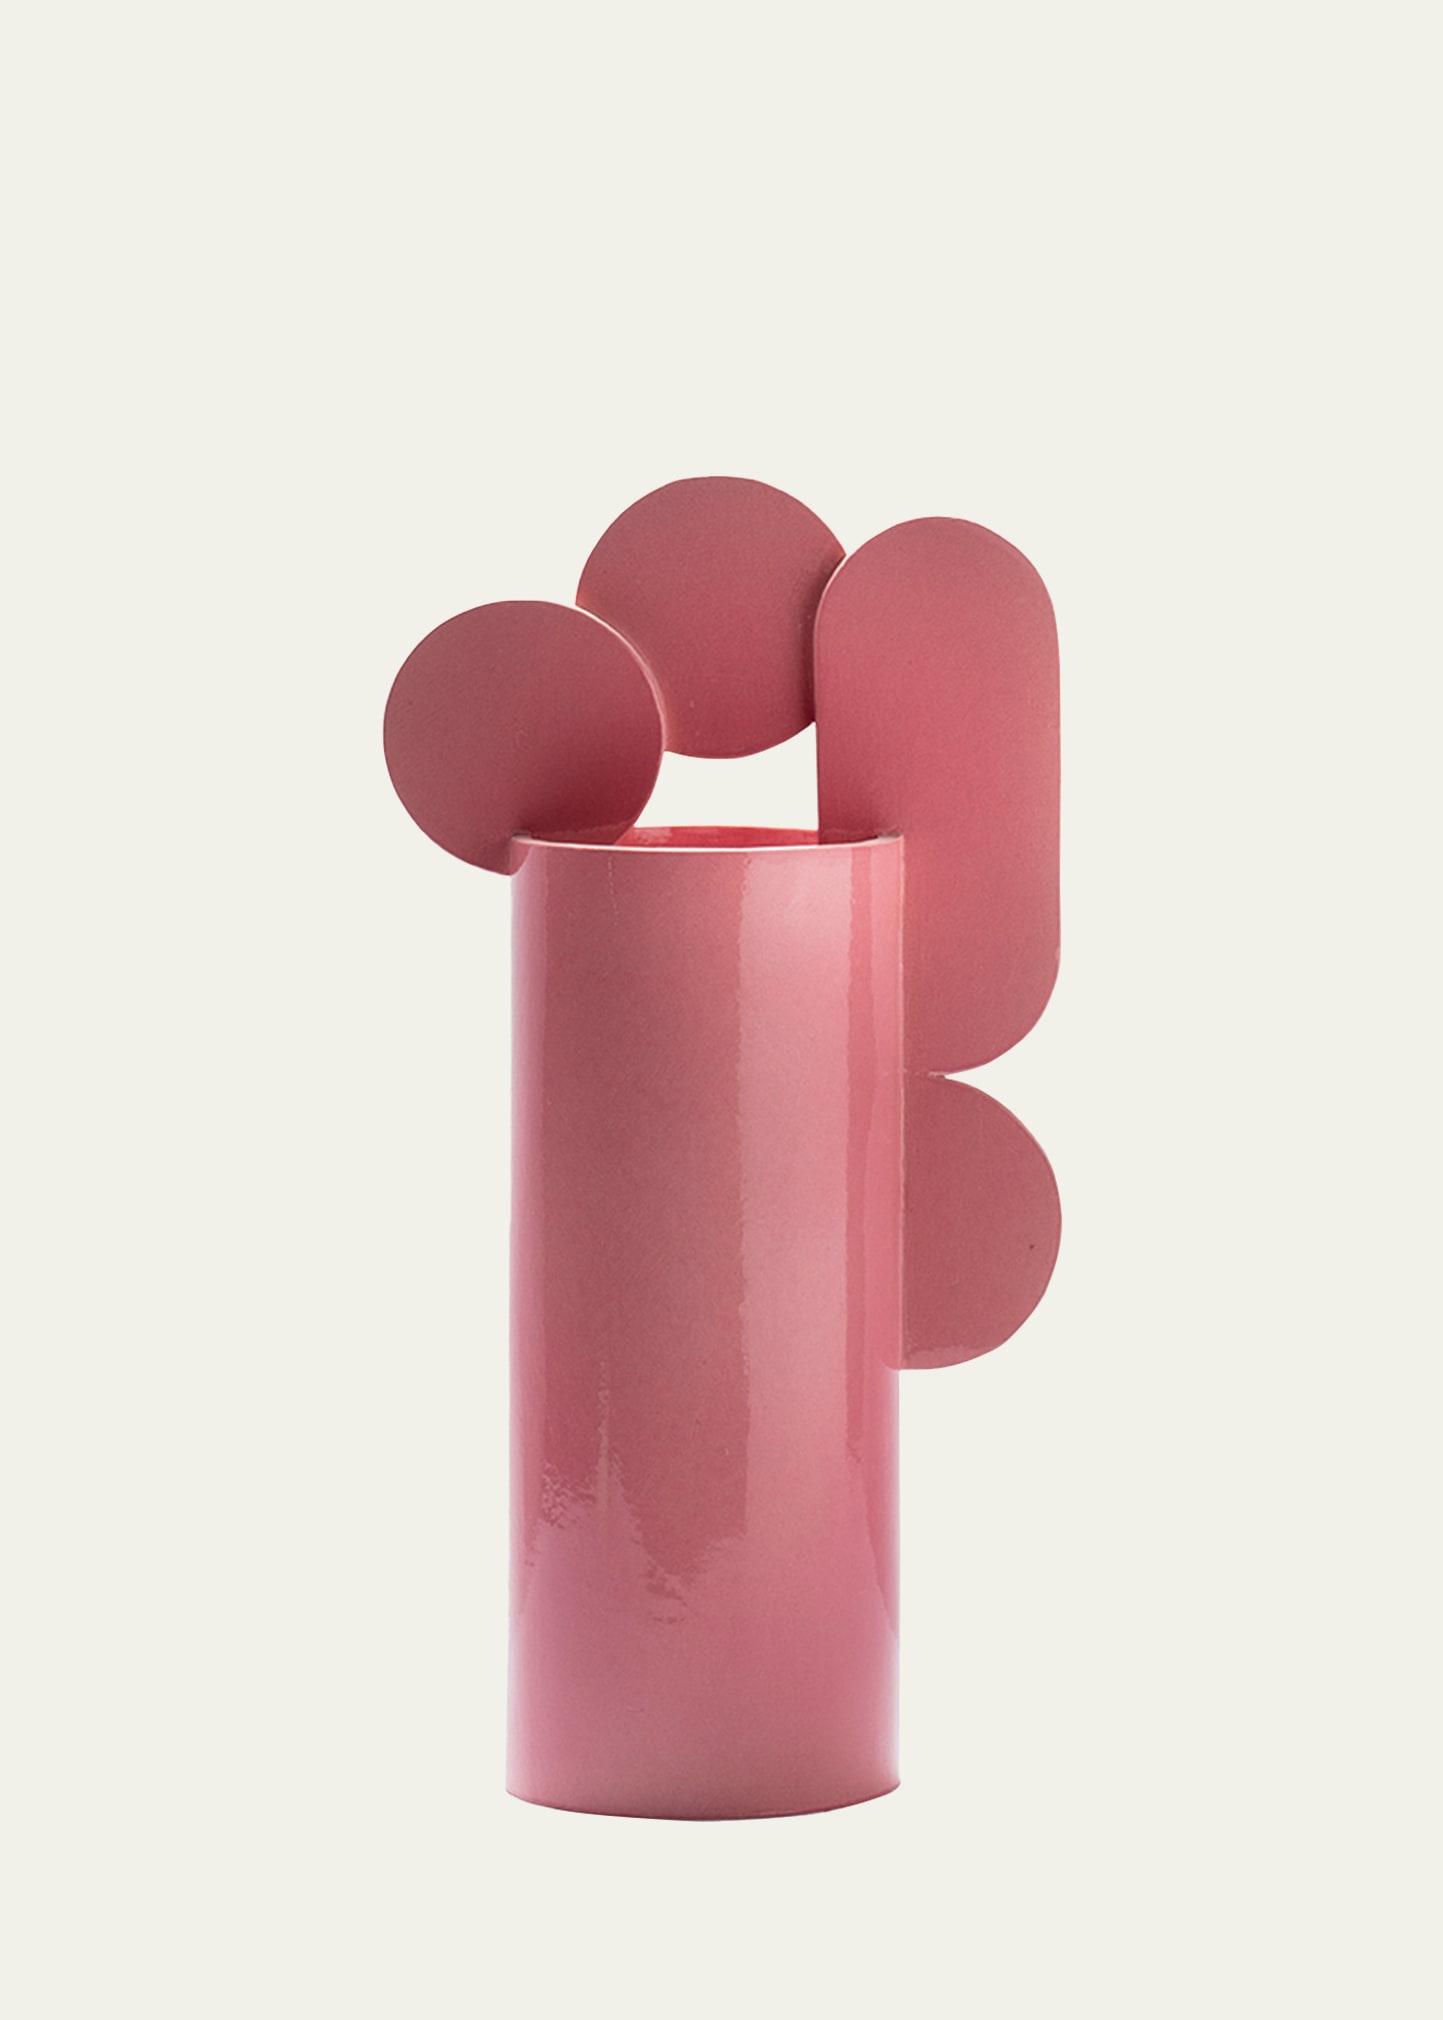 The Lovers Bubble Vase